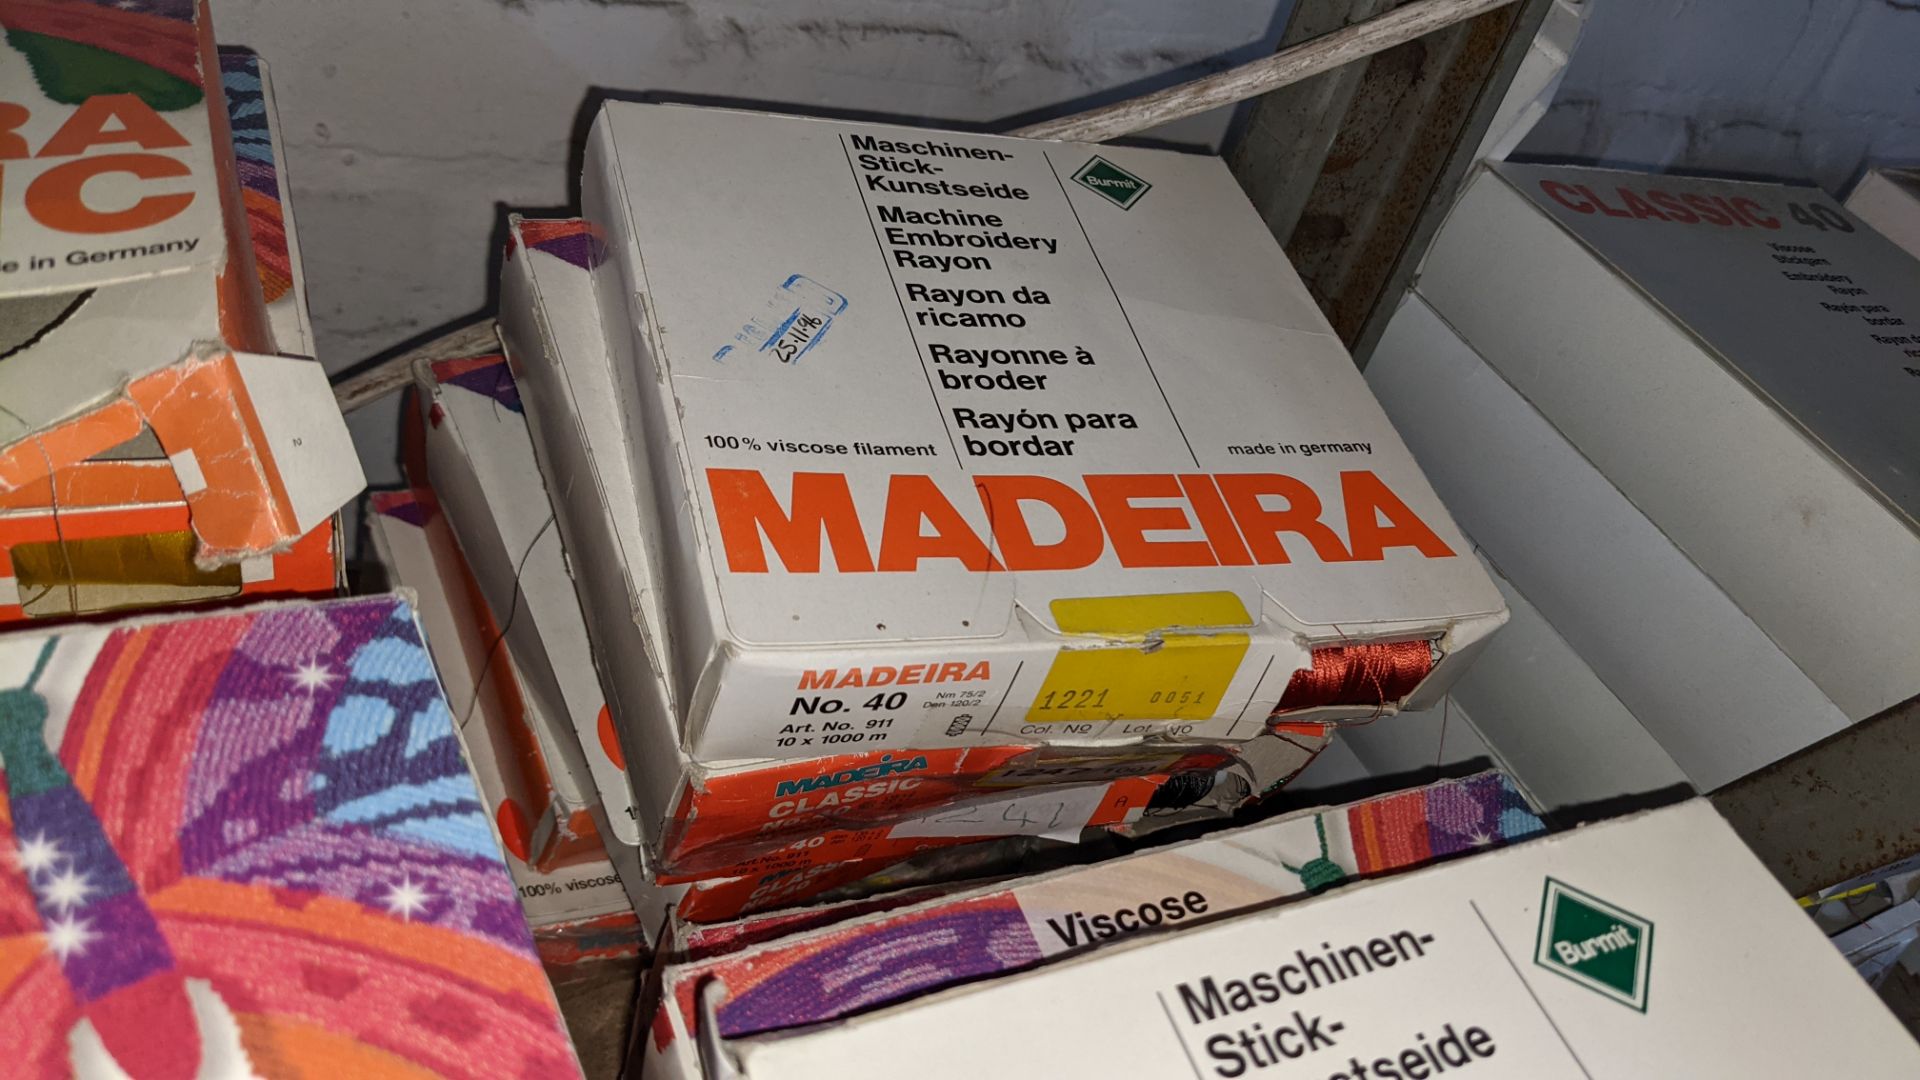 18 assorted boxes of Madeira Classic No. 40 embroidery rayon thread - Image 5 of 8